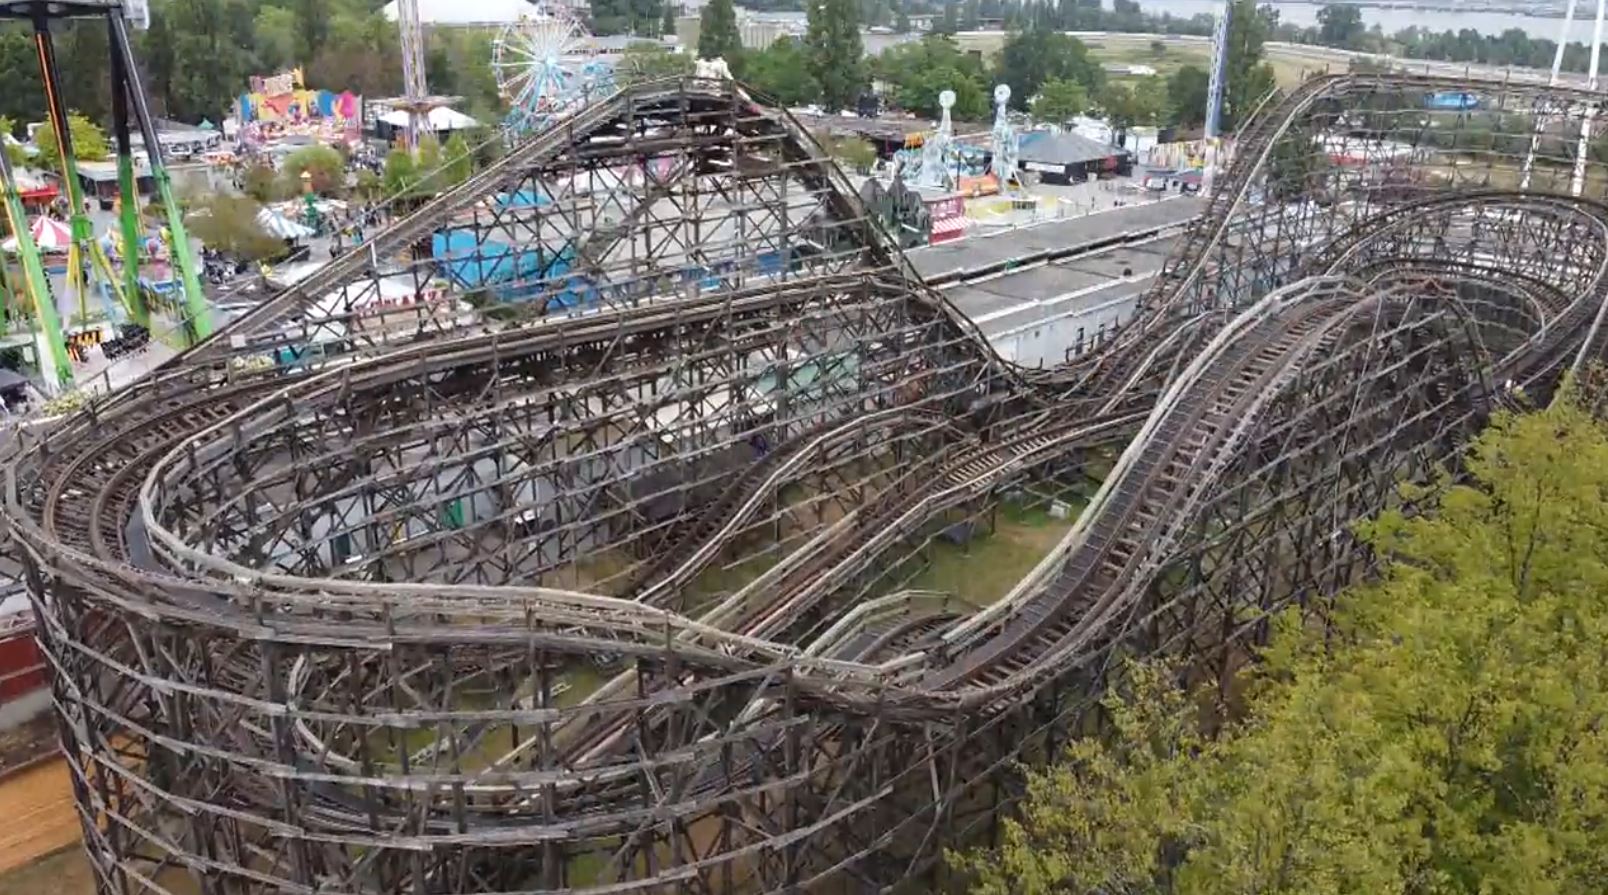 Playland's iconic 'clickety-clack' wooden roller coaster turns 65 - BC